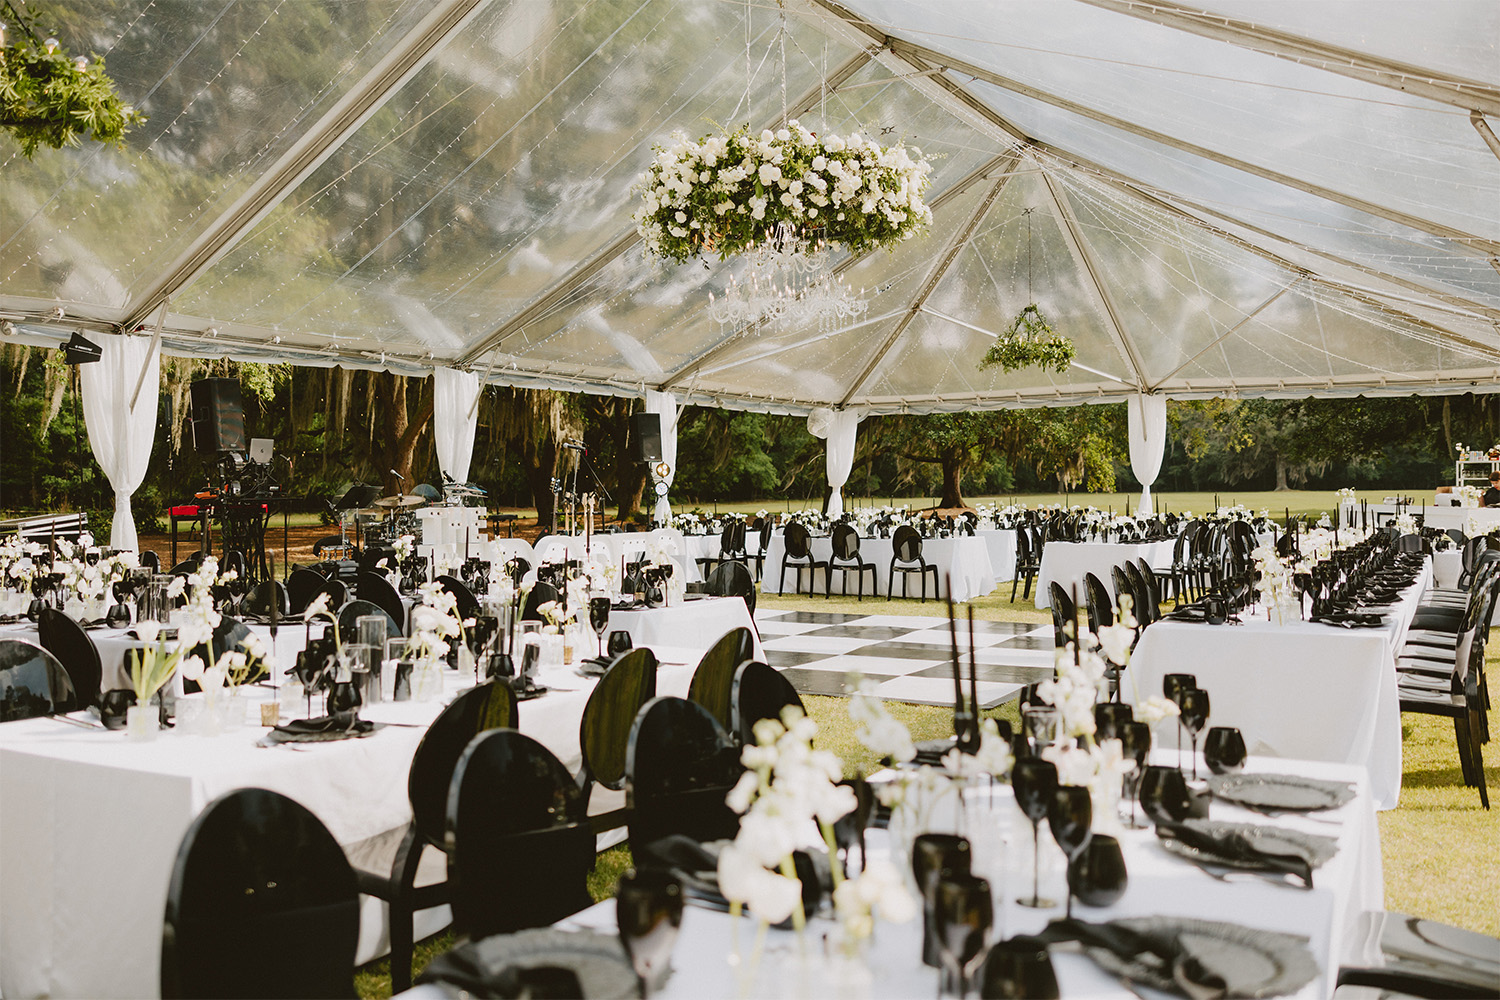 Outdoor venue with black and white theme